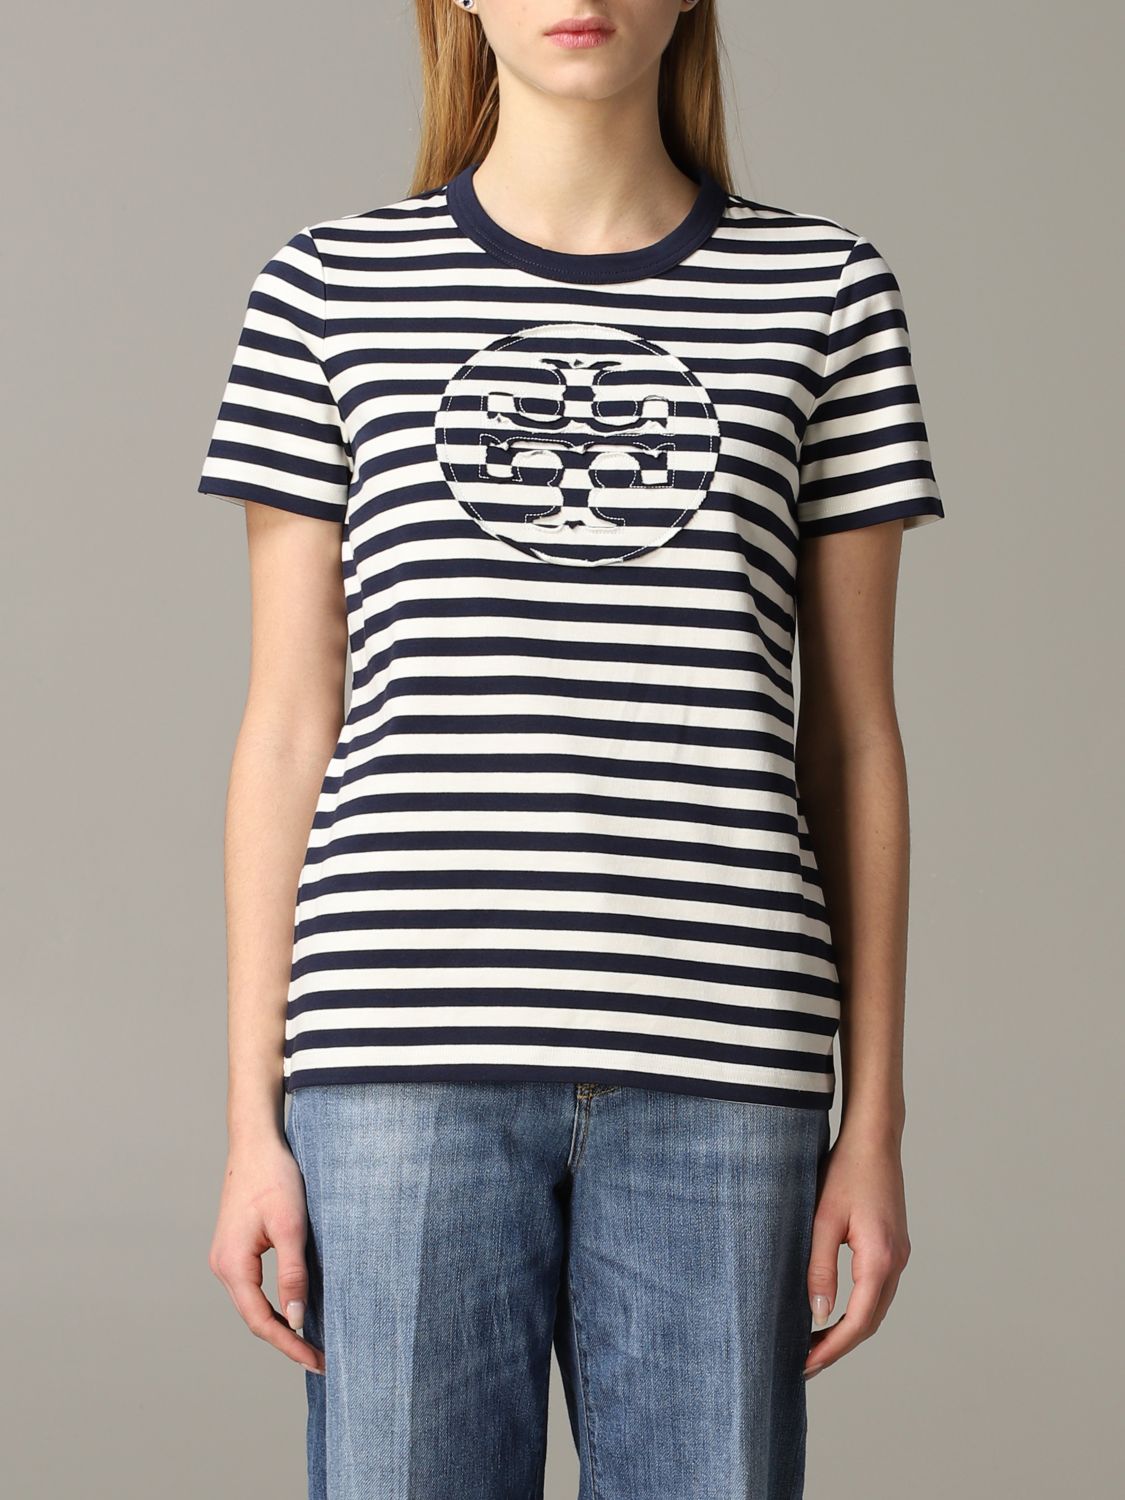 Tory Burch Outlet: striped T-shirt with logo - Black | Tory Burch t-shirt  63871 online on 